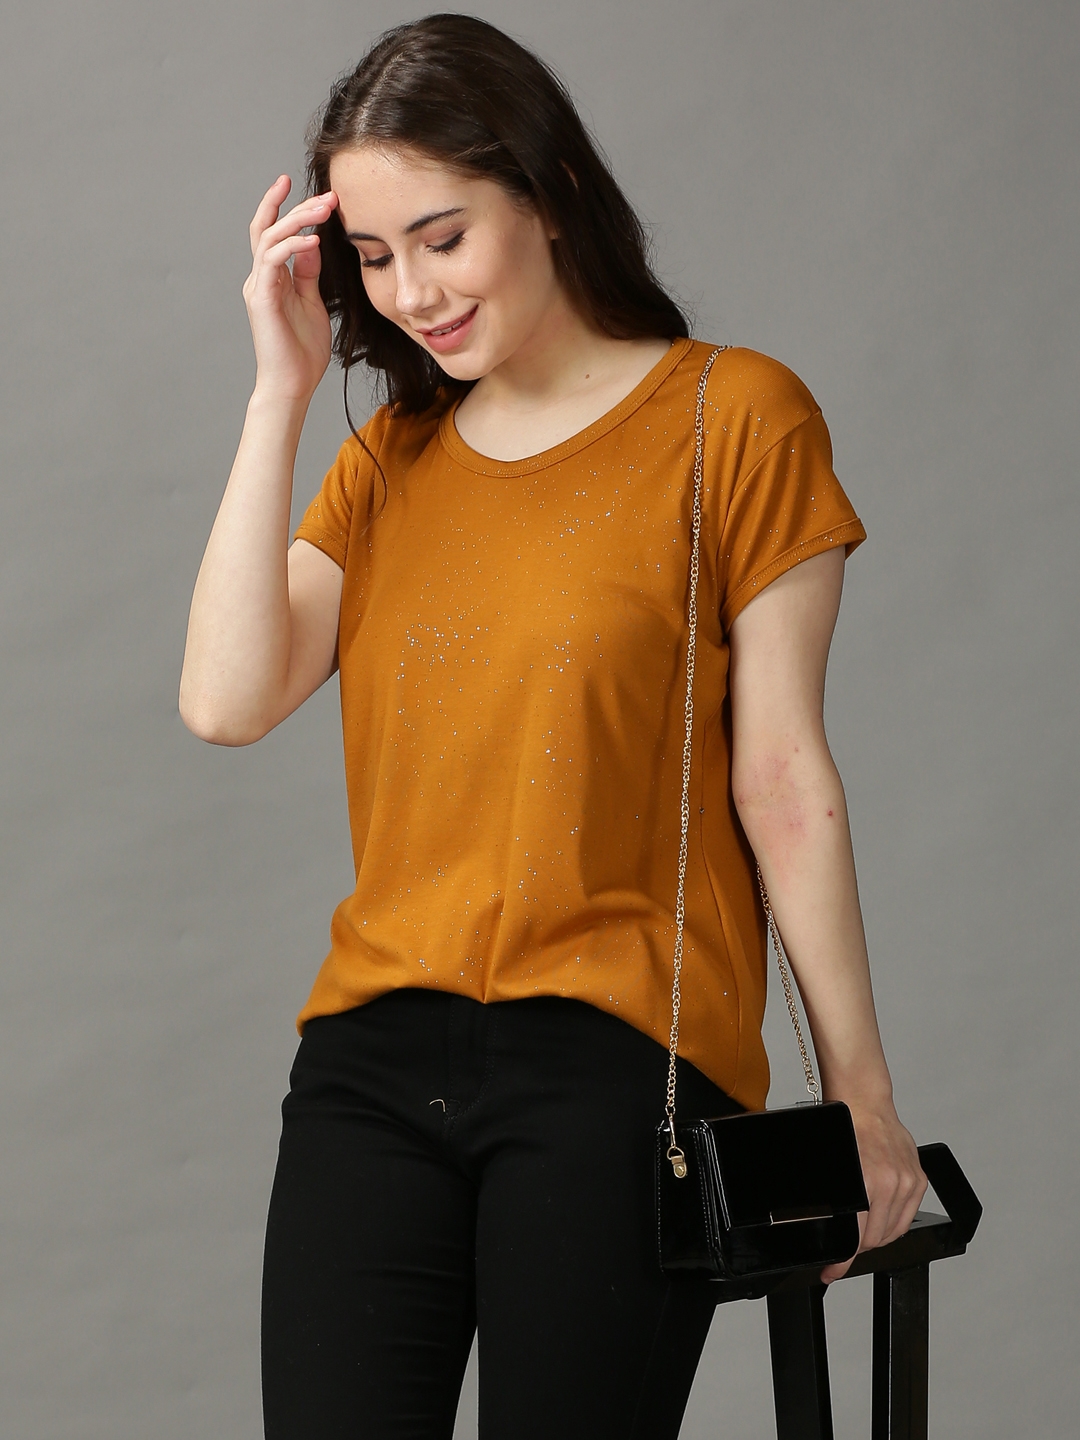 Showoff | SHOWOFF Women's Short Sleeves Round Neck Mustard Solid Top